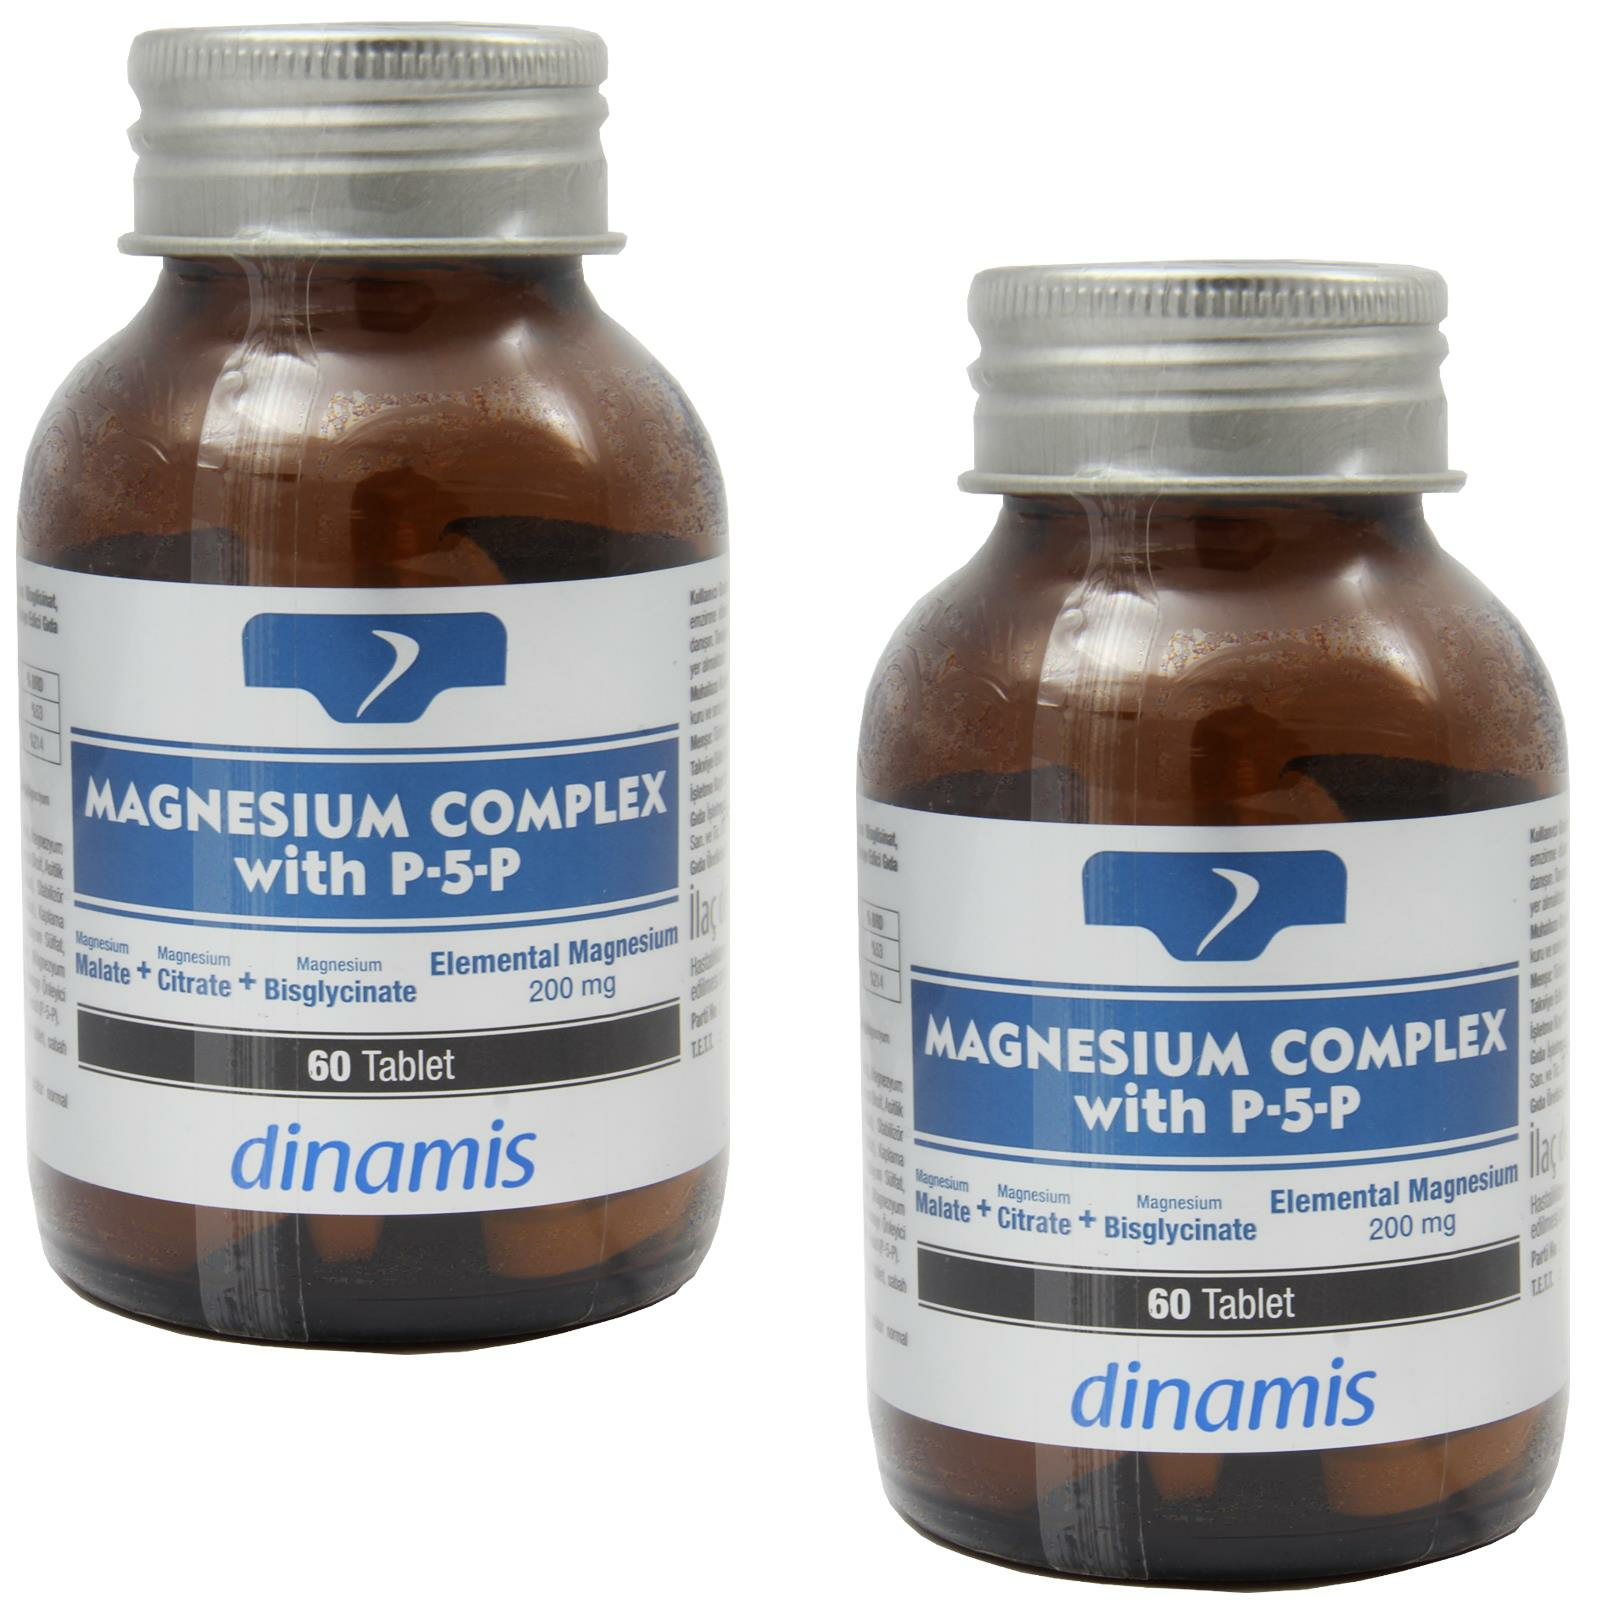 Dinamis Magnesium Complex With P-5-P 60 Tablet 2 ADET